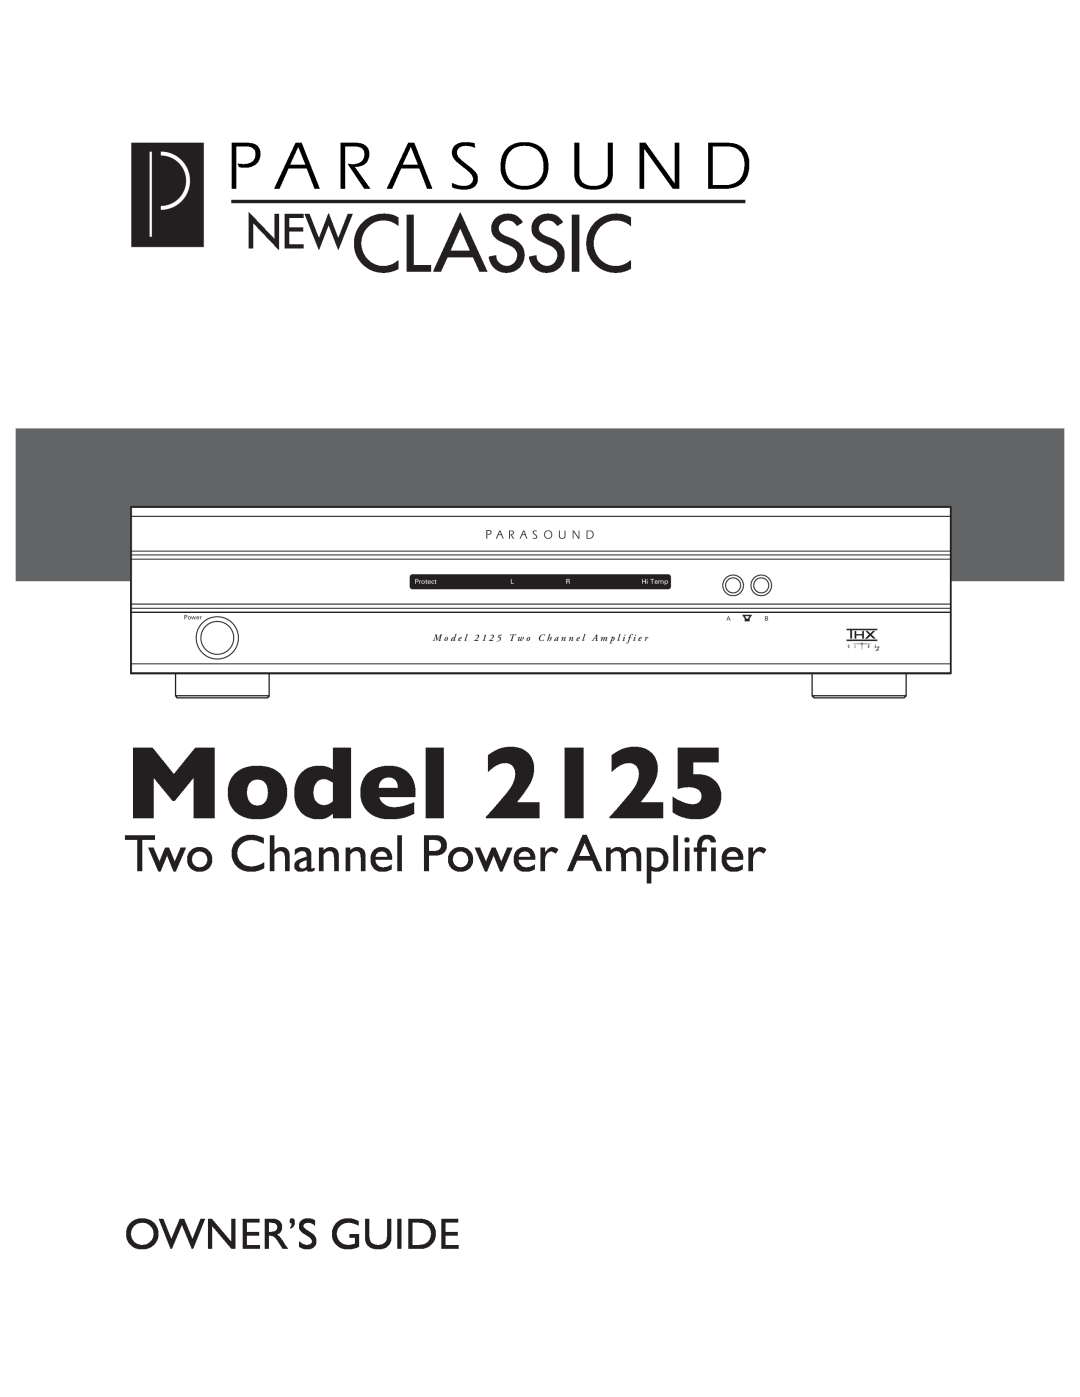 Parasound 2125 manual Model, Two Channel Power Ampliﬁer, Owner’S Guide, Protect, Hi Temp 